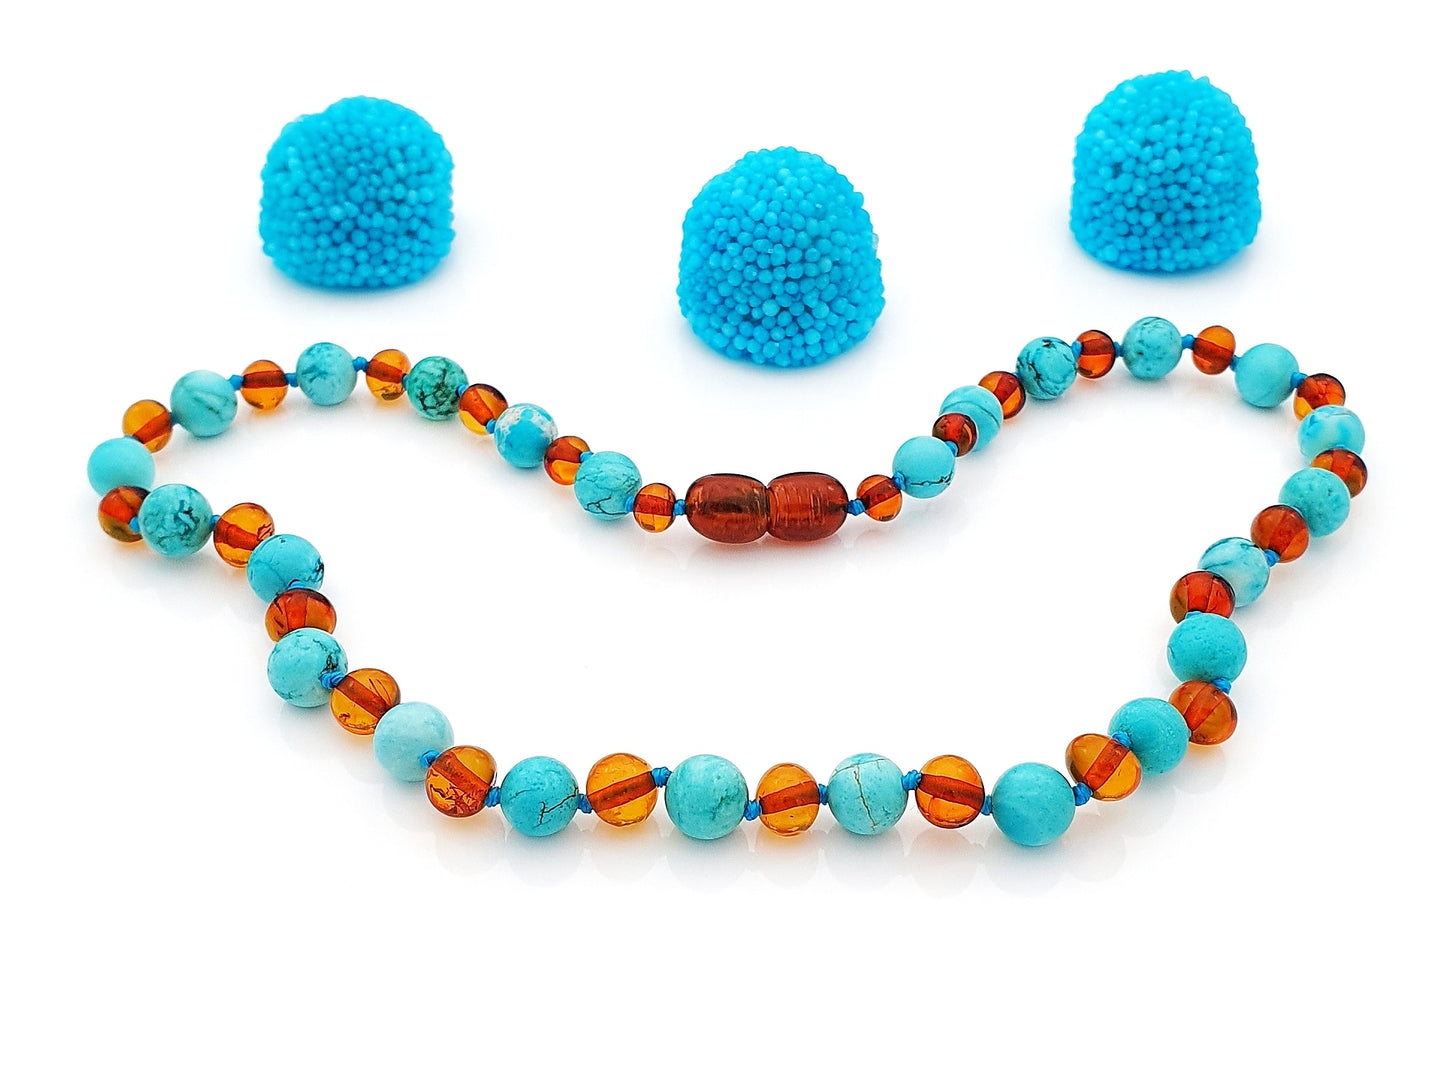 amber baby necklace with blue turquoise stones